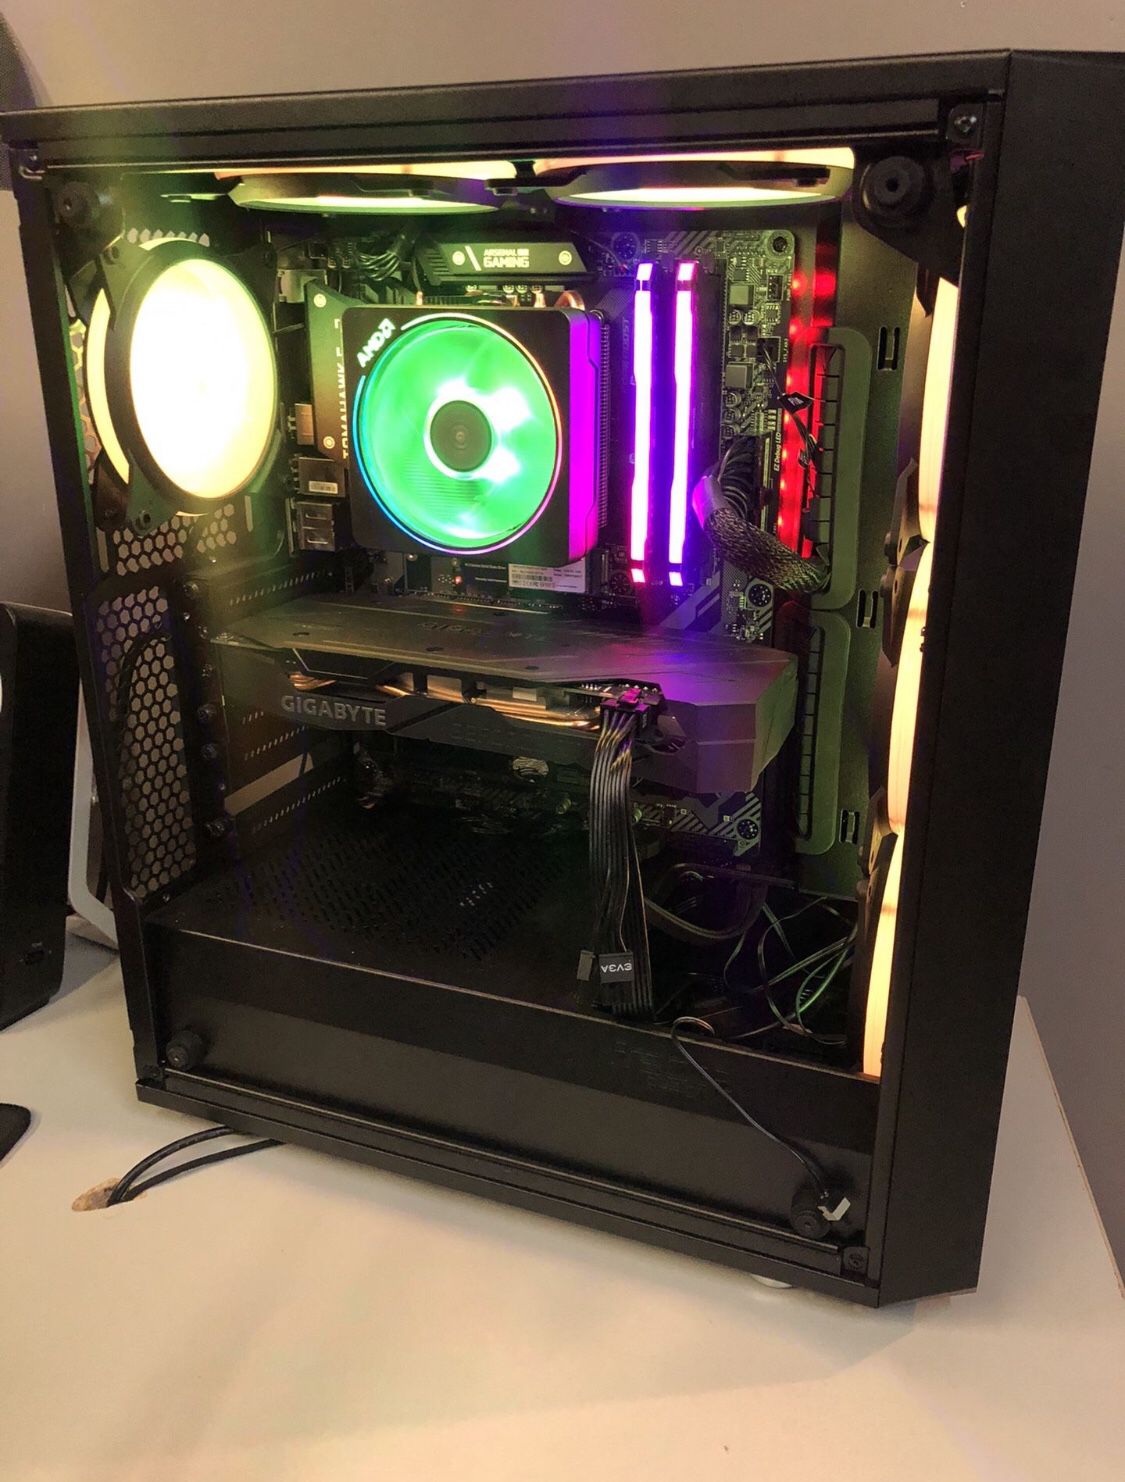 Super Computer Gaming PC! Ryzen 7 3700X RTX 2070 SUPER !! for New Bedford, MA - OfferUp